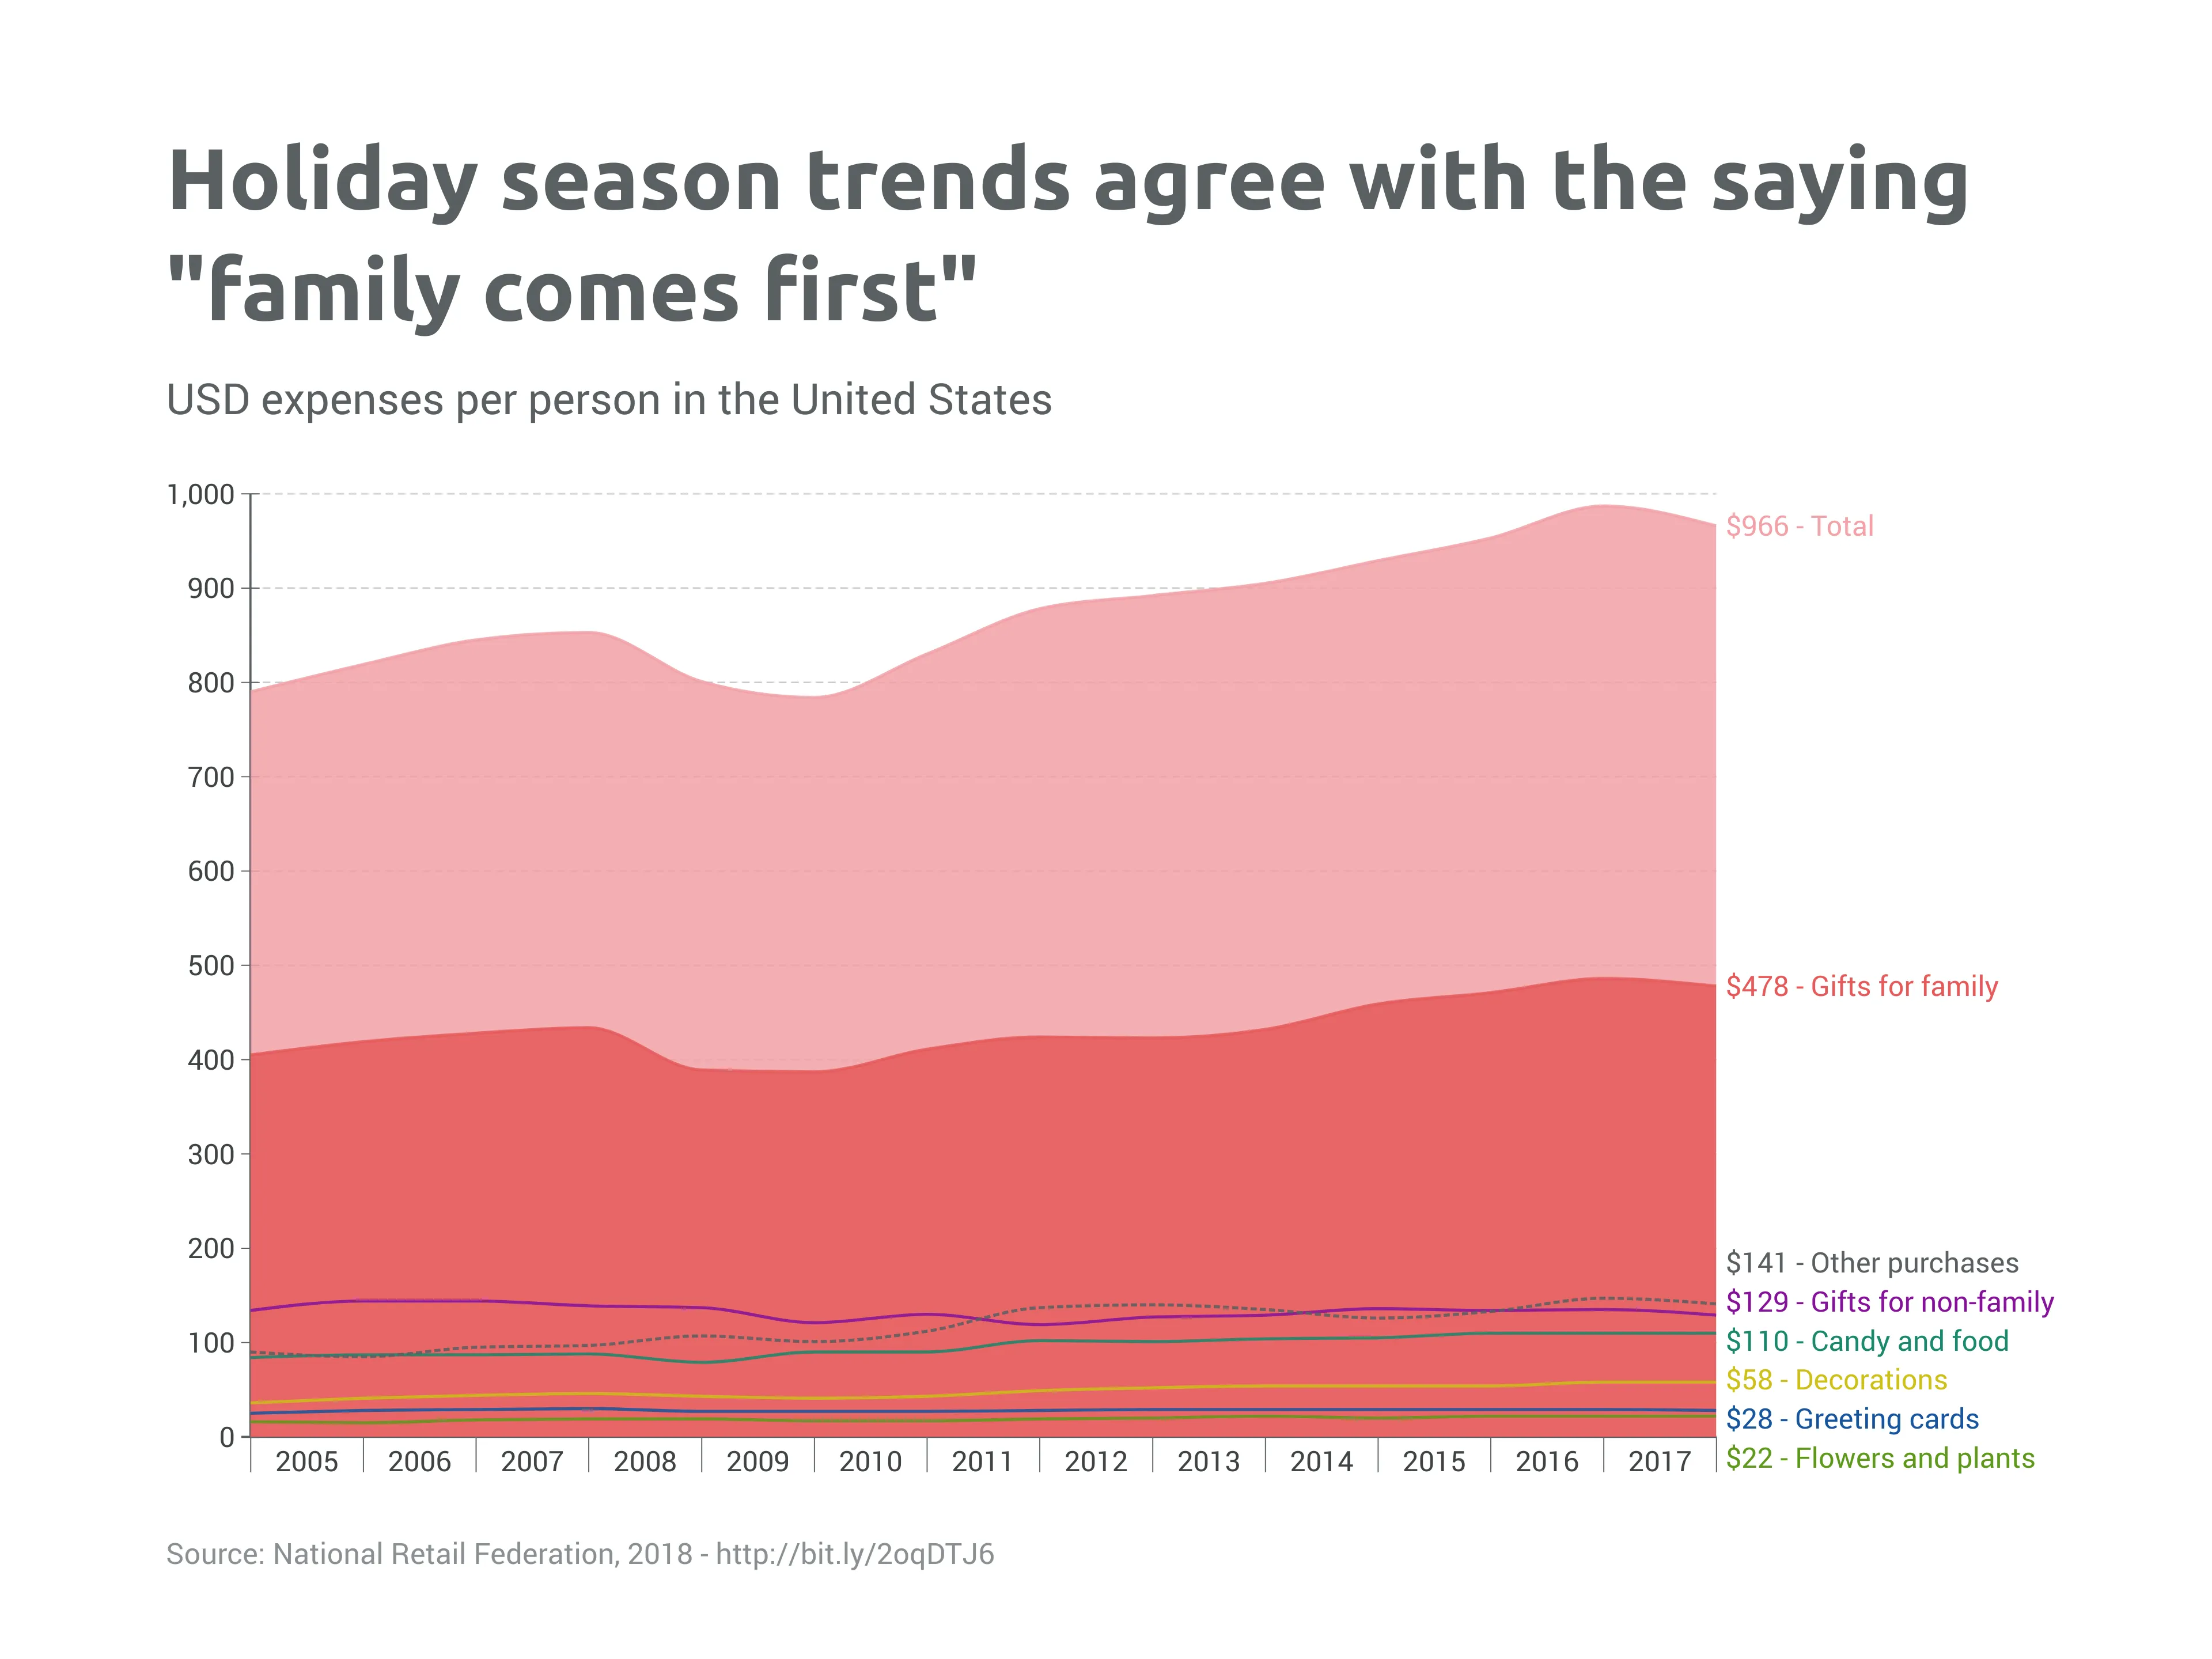 Holiday season trends agree with the saying "family comes first"